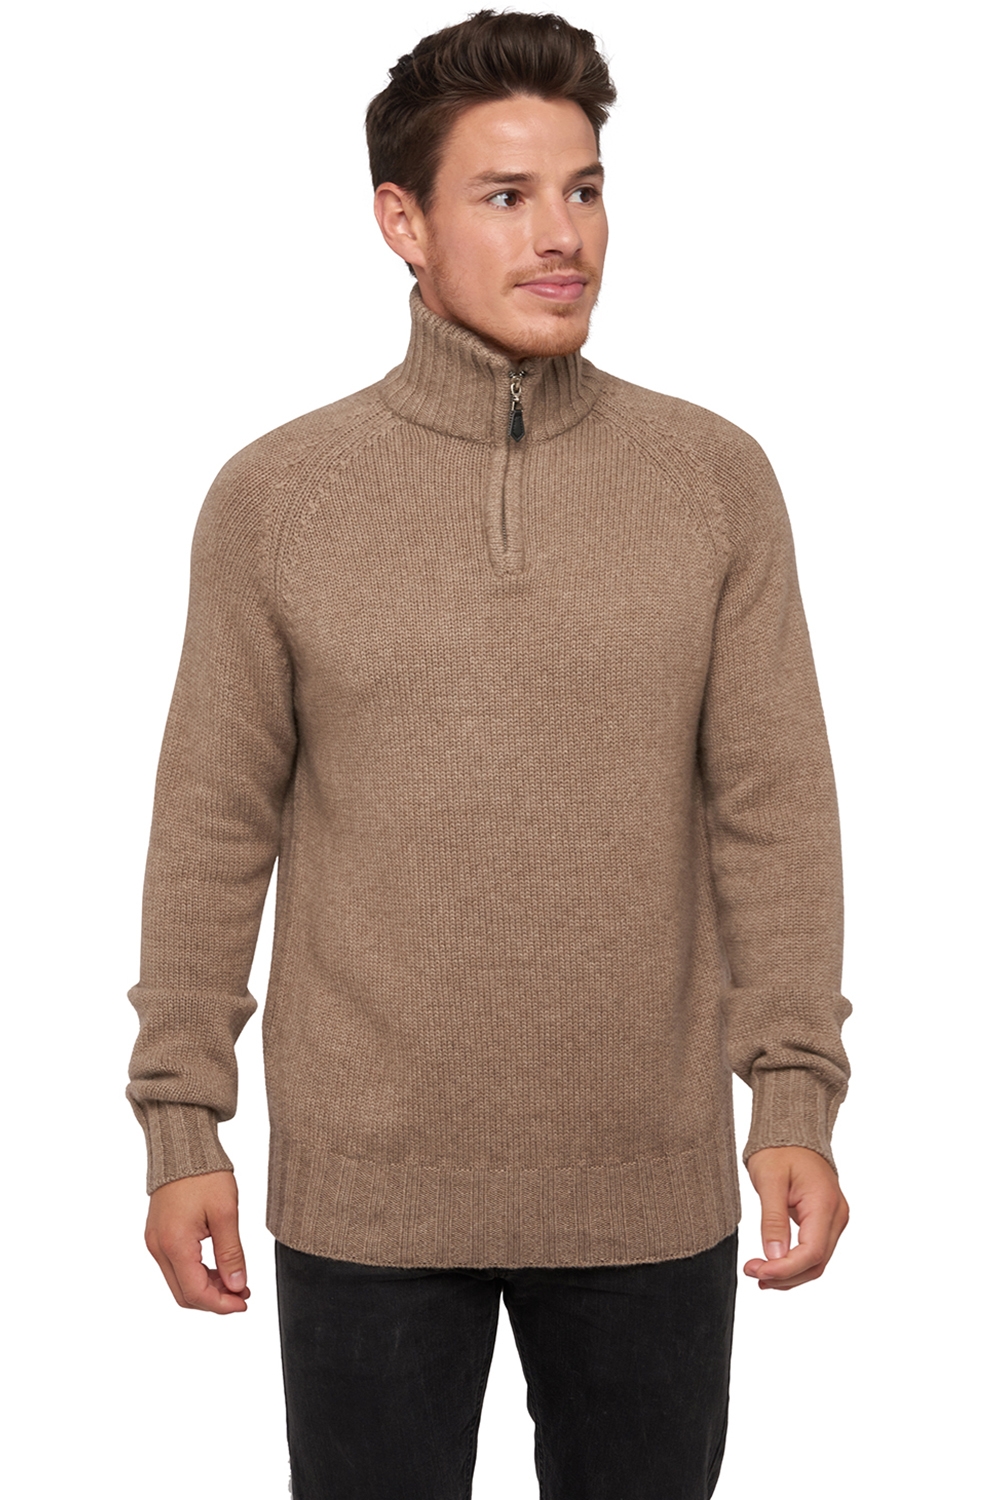 Cachemire Naturel pull homme natural viero natural brown 3xl